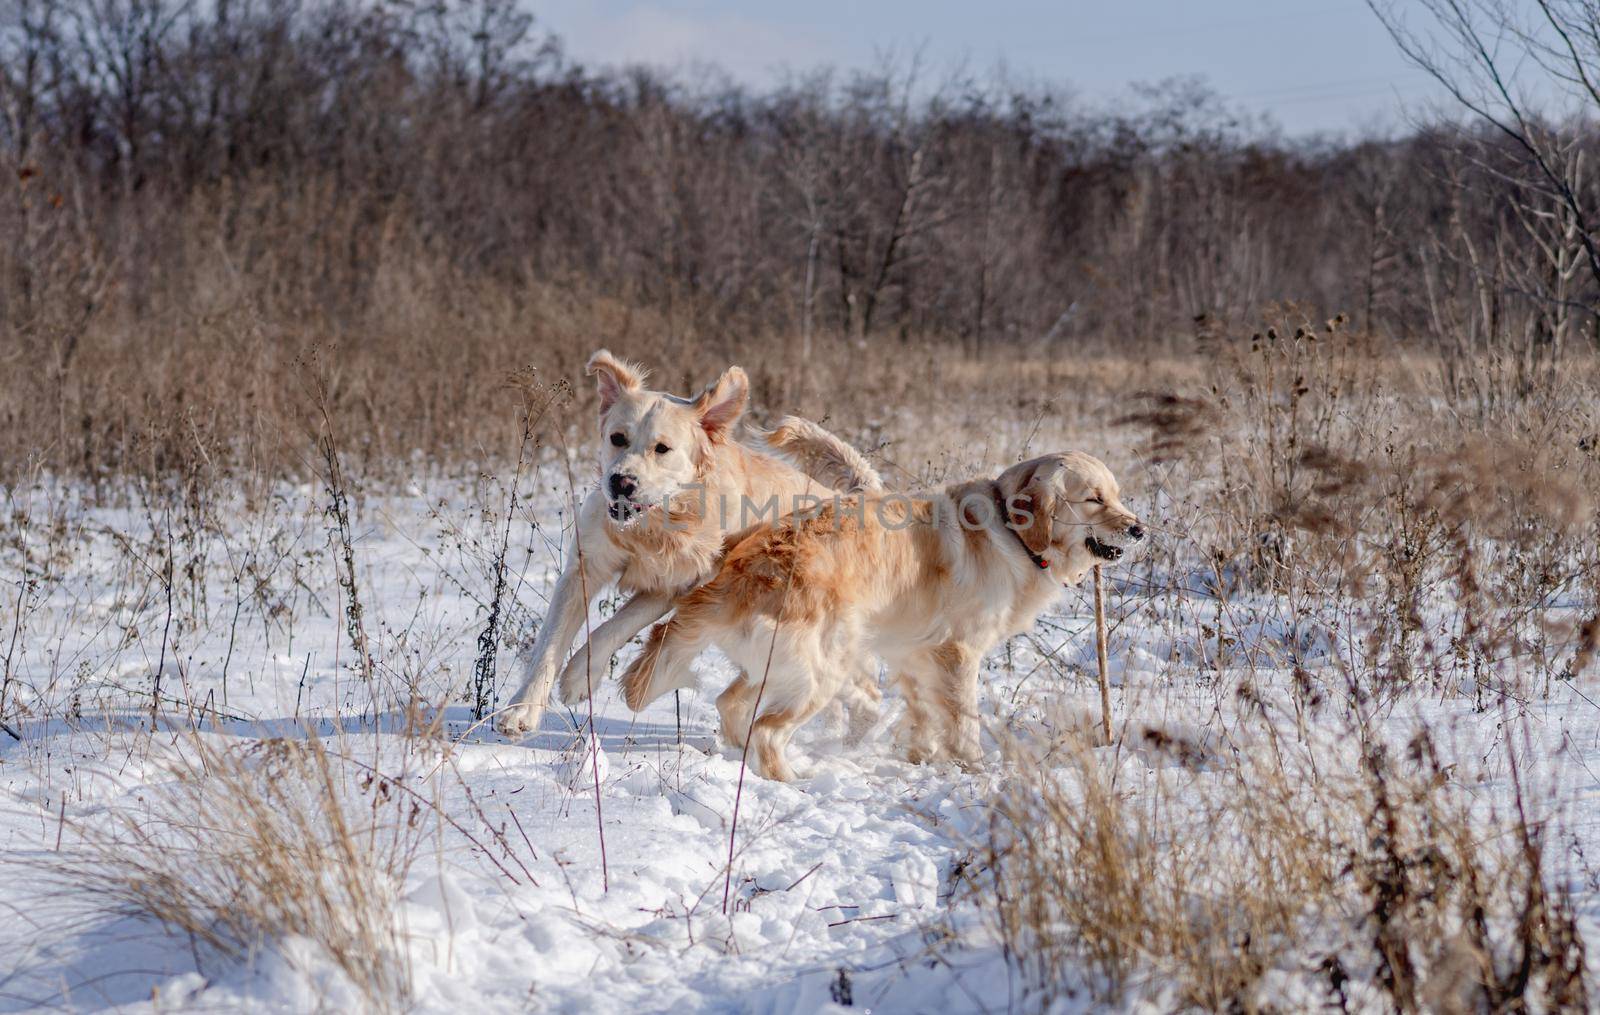 Golden retriever dogs playing together on snowy winter nature